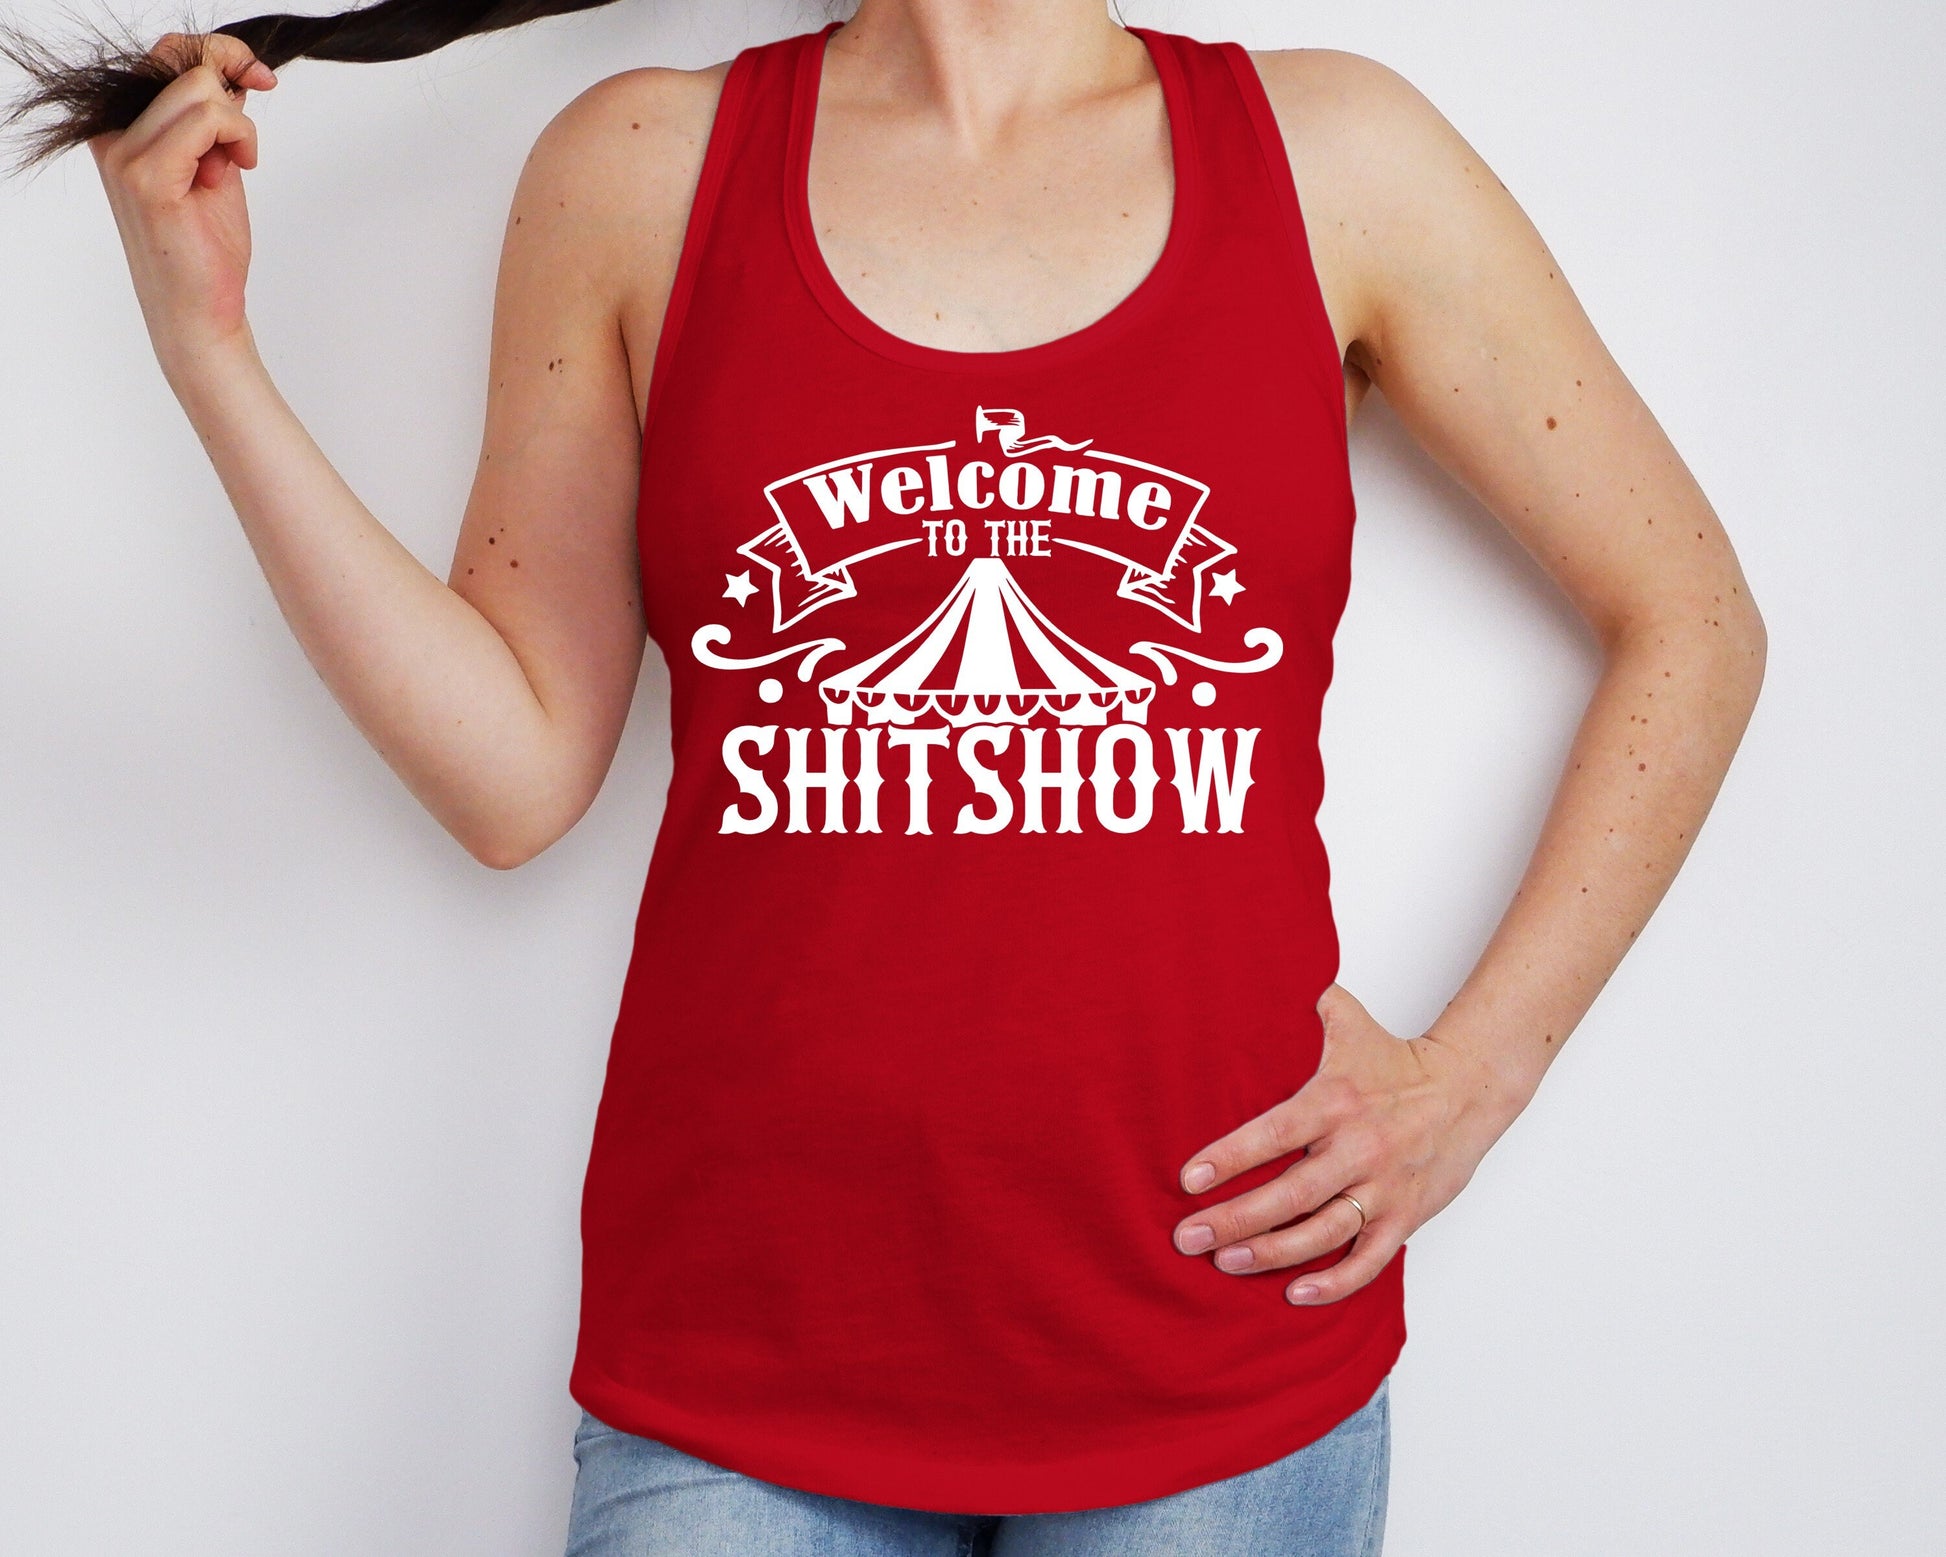 Welcome to the Shitshow Womens racerback tank t-shirt - mom life tank top - mom tank top - funny workout tank - mom shirt - mom of multiples